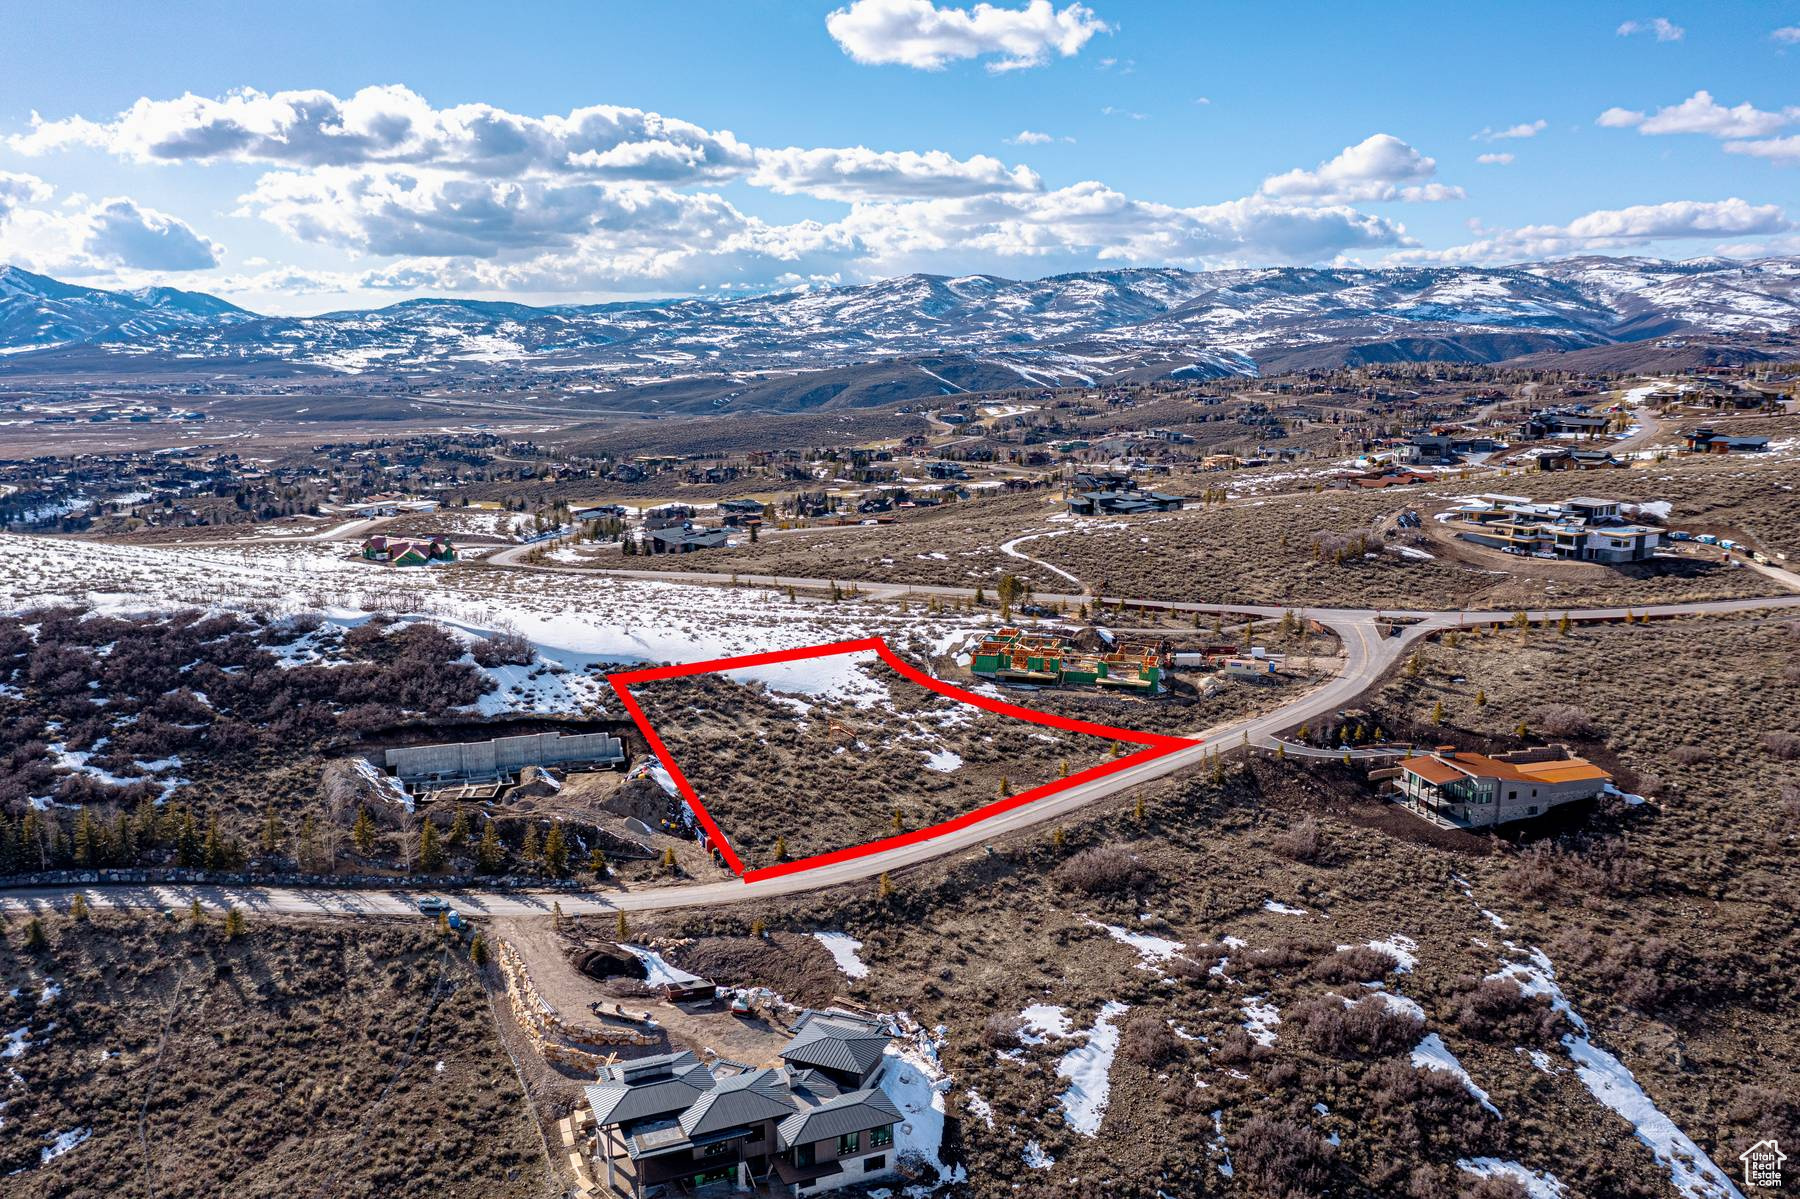 7113 PAINTED VALLEY #53, Park City, Utah 84098, ,Land,For sale,PAINTED VALLEY,1991394